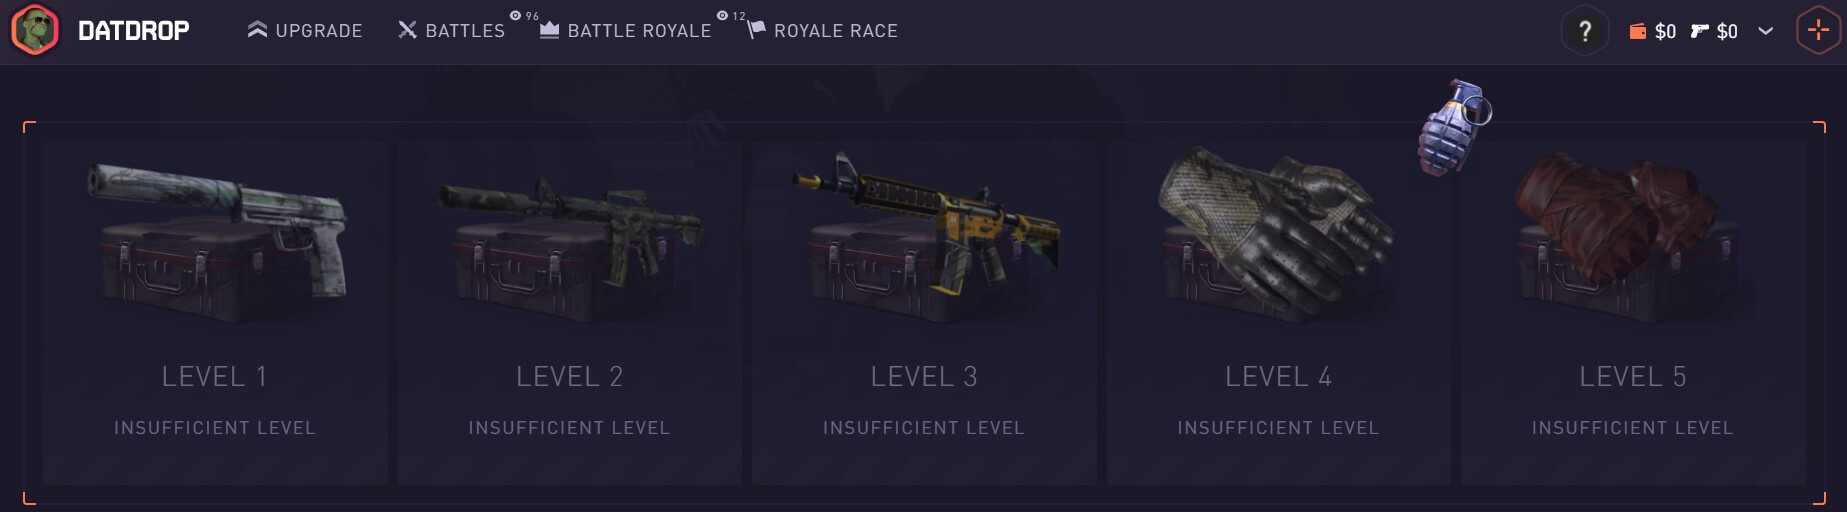 datdrop free cases